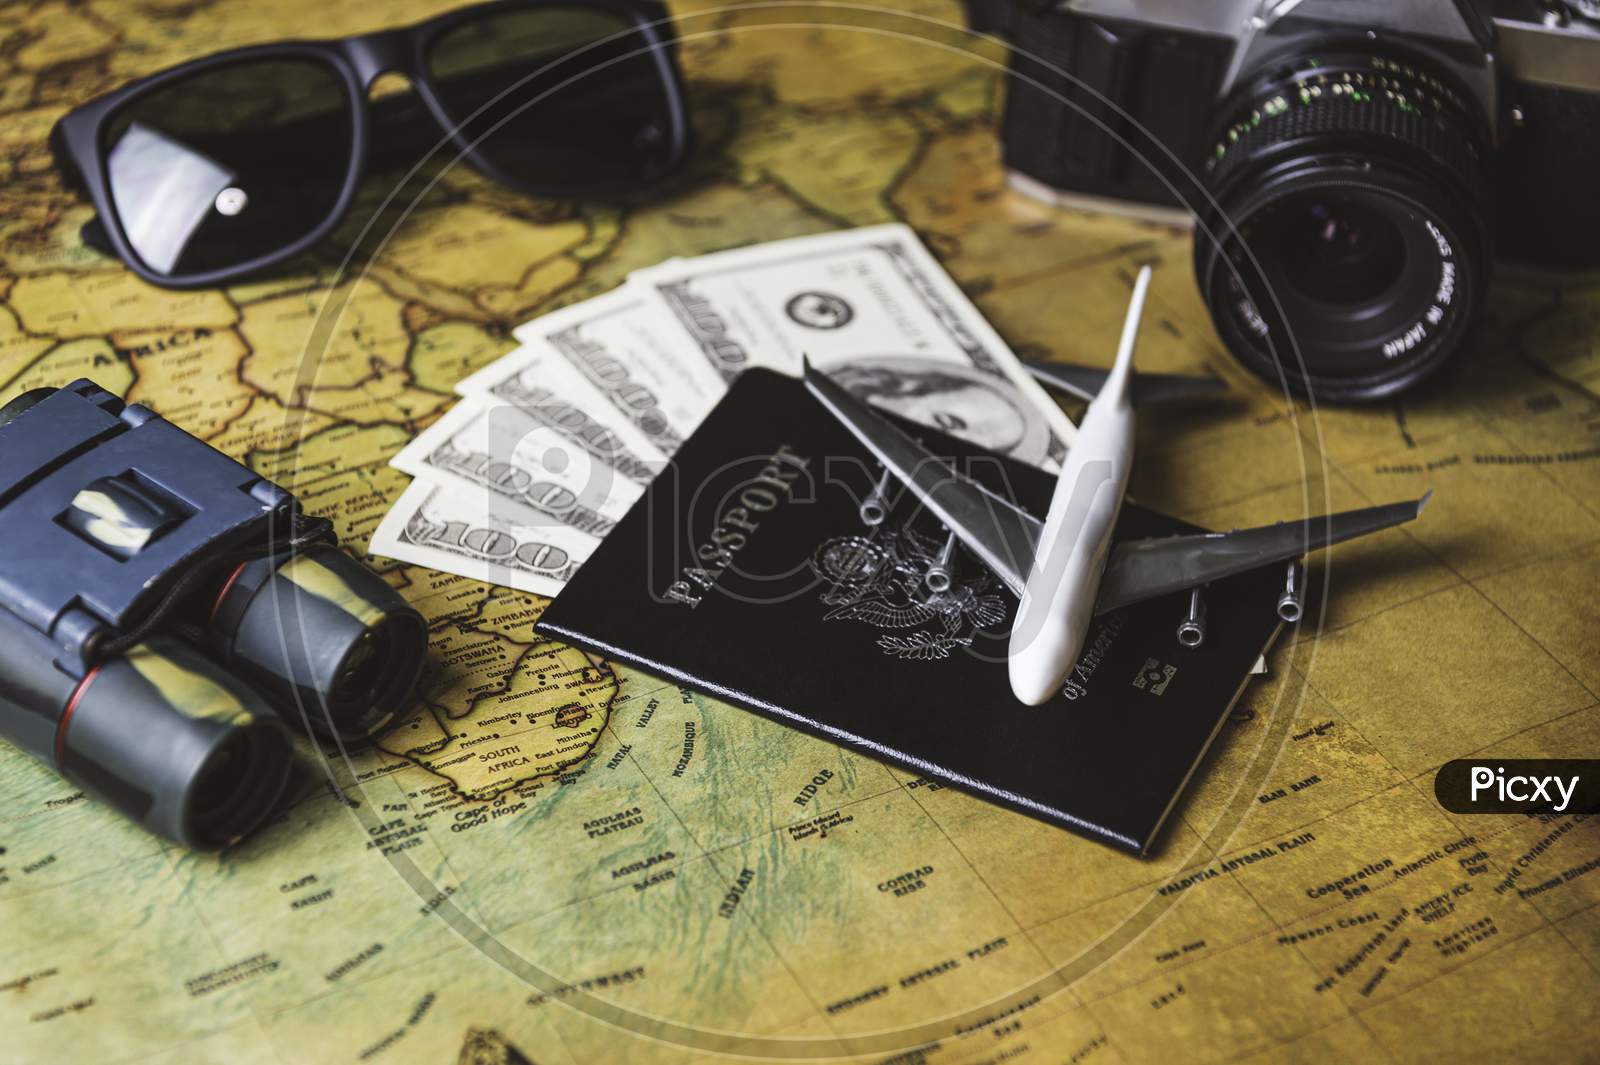 Tourist Planning Props And Travel Accessories With American Passport, Airplane, Digital Camera, Telescope, Sunglasses And Us Dollar Banknote Money On Old Grunge Style Map. Holiday And Vacation Concept